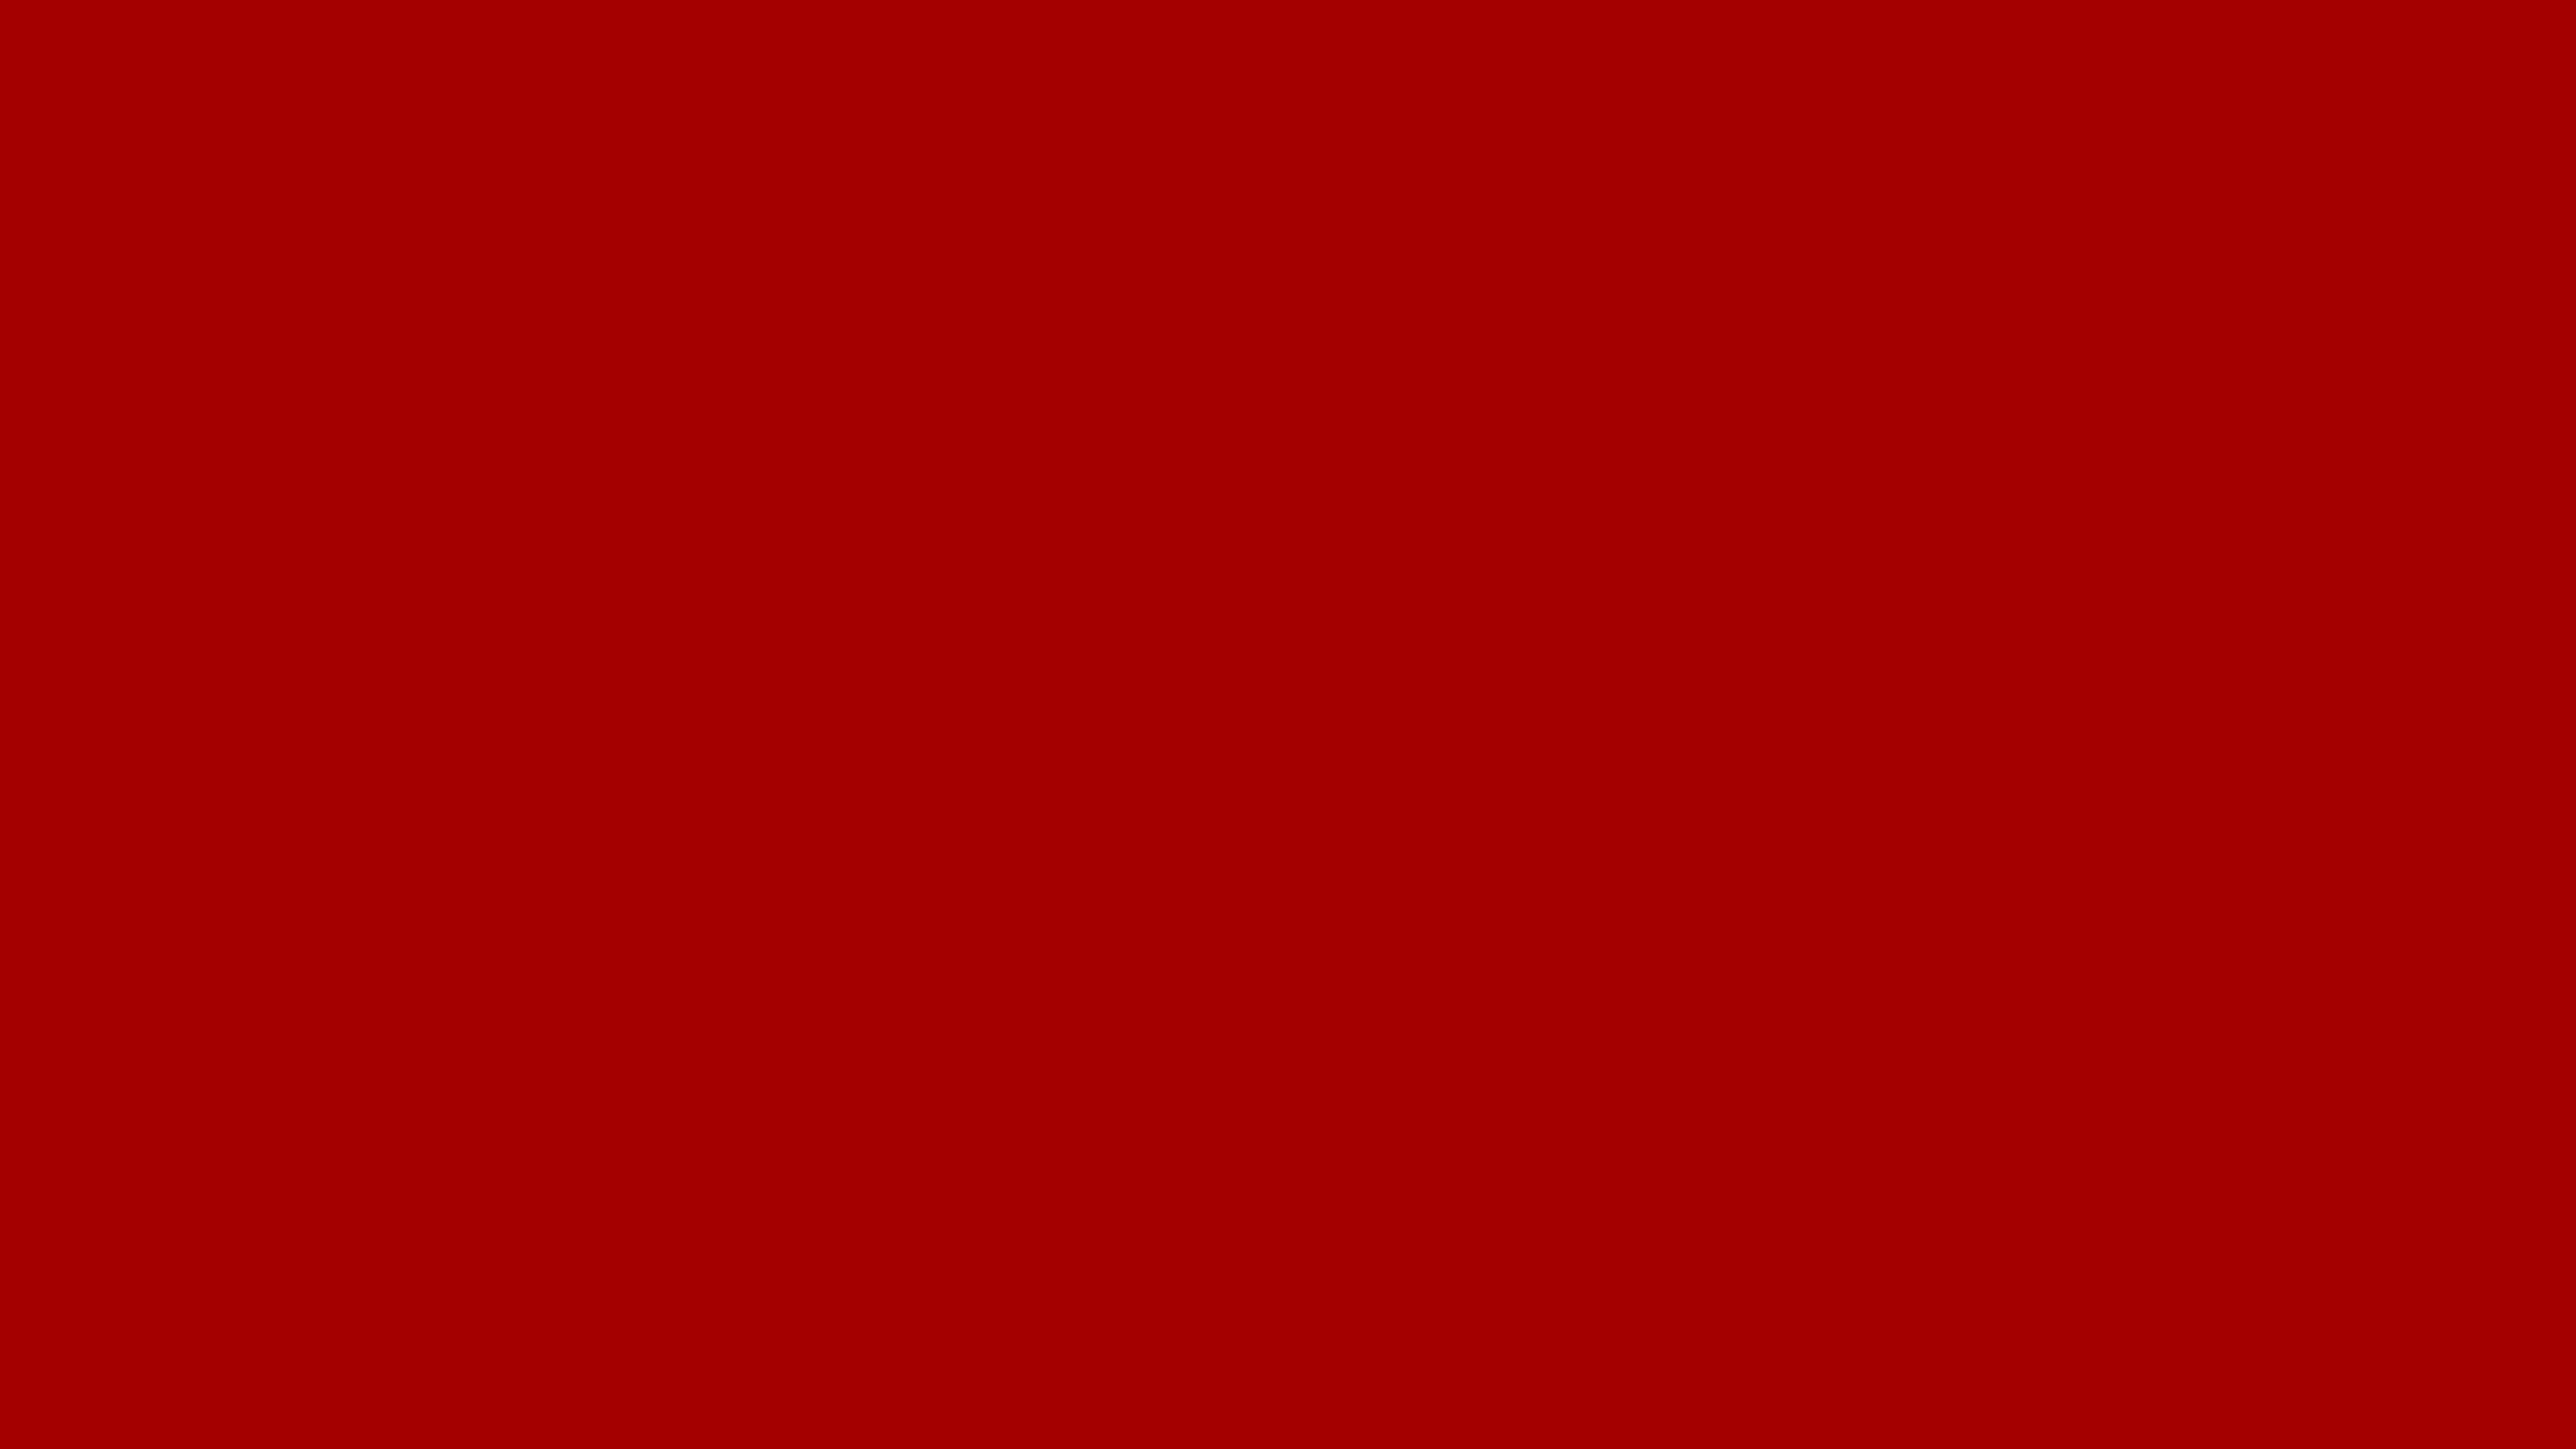 7680x4320 Dark Candy Apple Red Solid Color Background